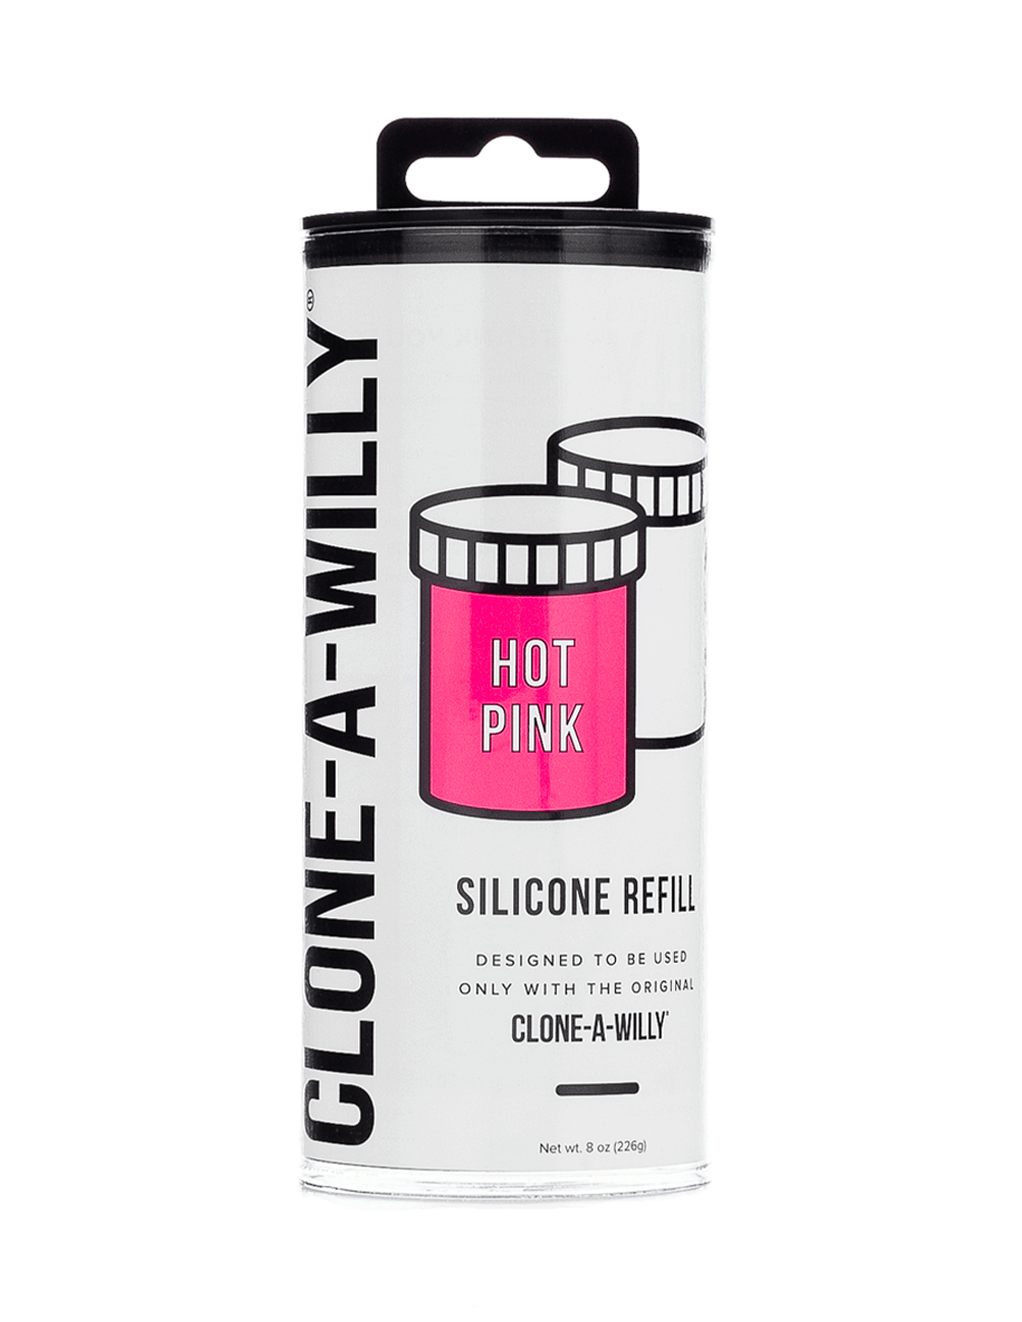 Clone-A-Willy Refill Kit - Hot Pink - Package